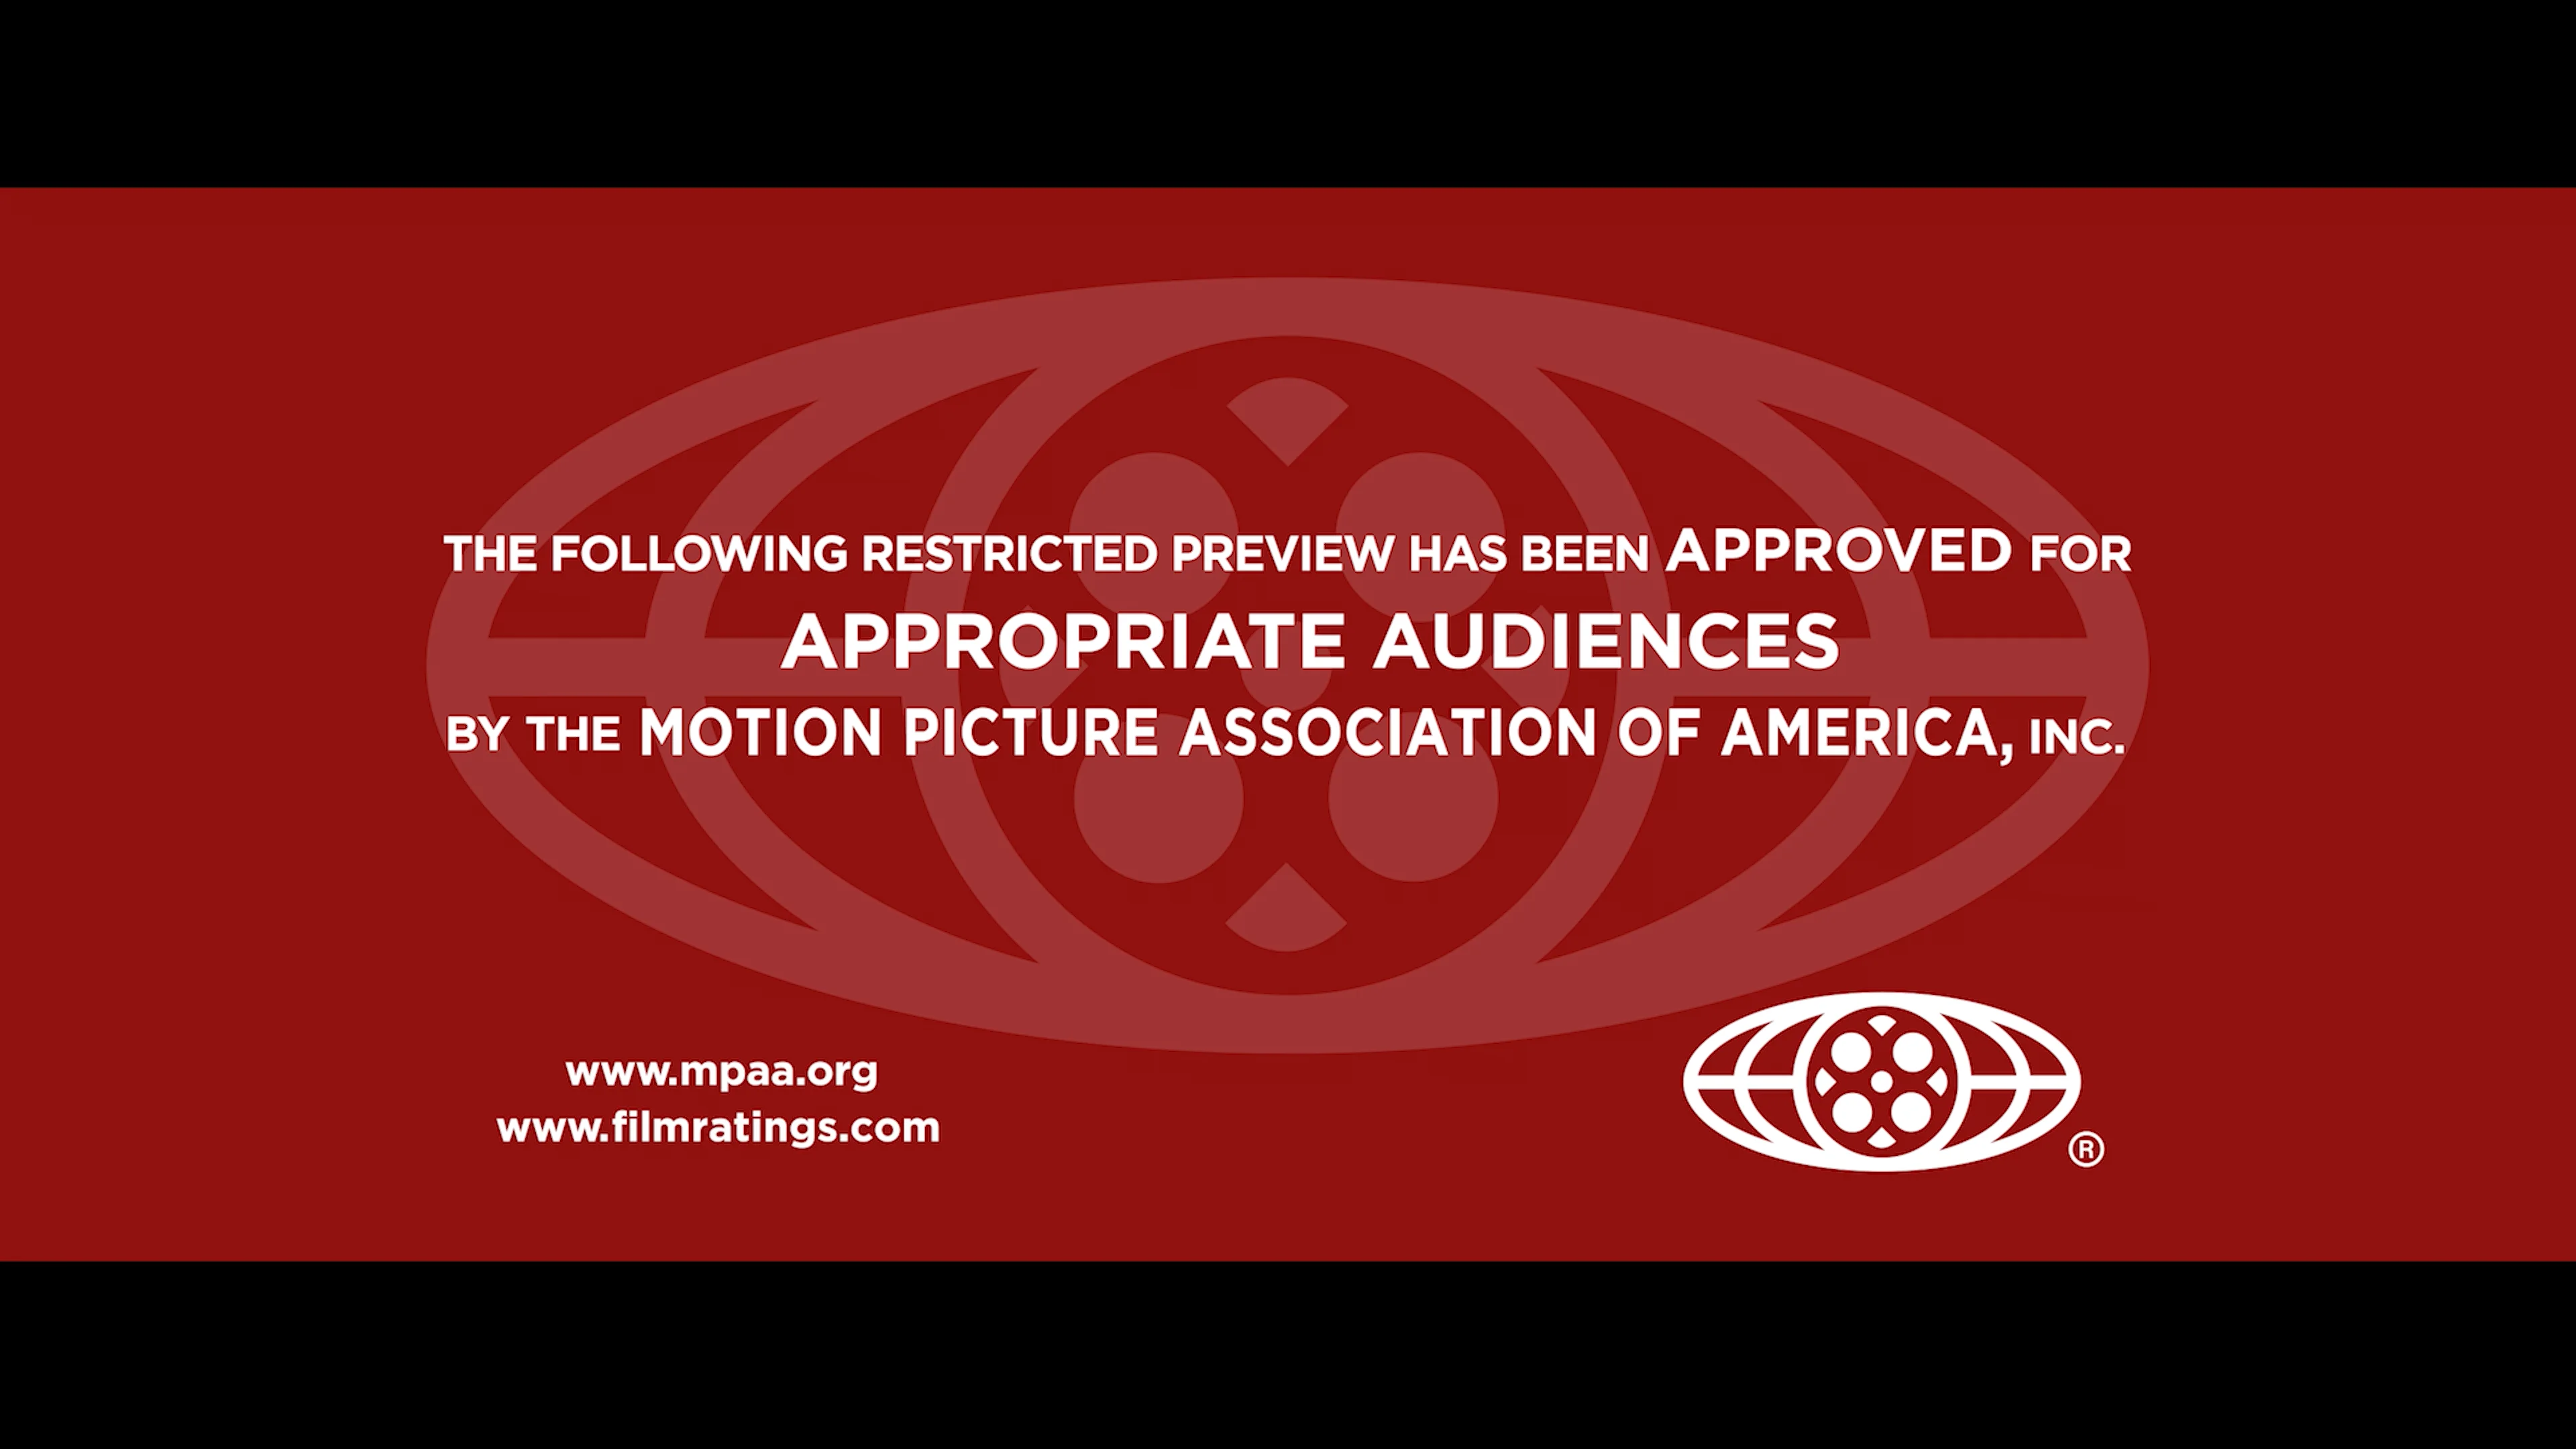 Motion picture Association of America logo. Motion picture Association of America Воронеж. The following Preview has been approved for all audiences PG. Motion picture Association of America this picture made under the jurisdiction of affiliated with a f l. c l o. c l o logo. Appropriate audiences